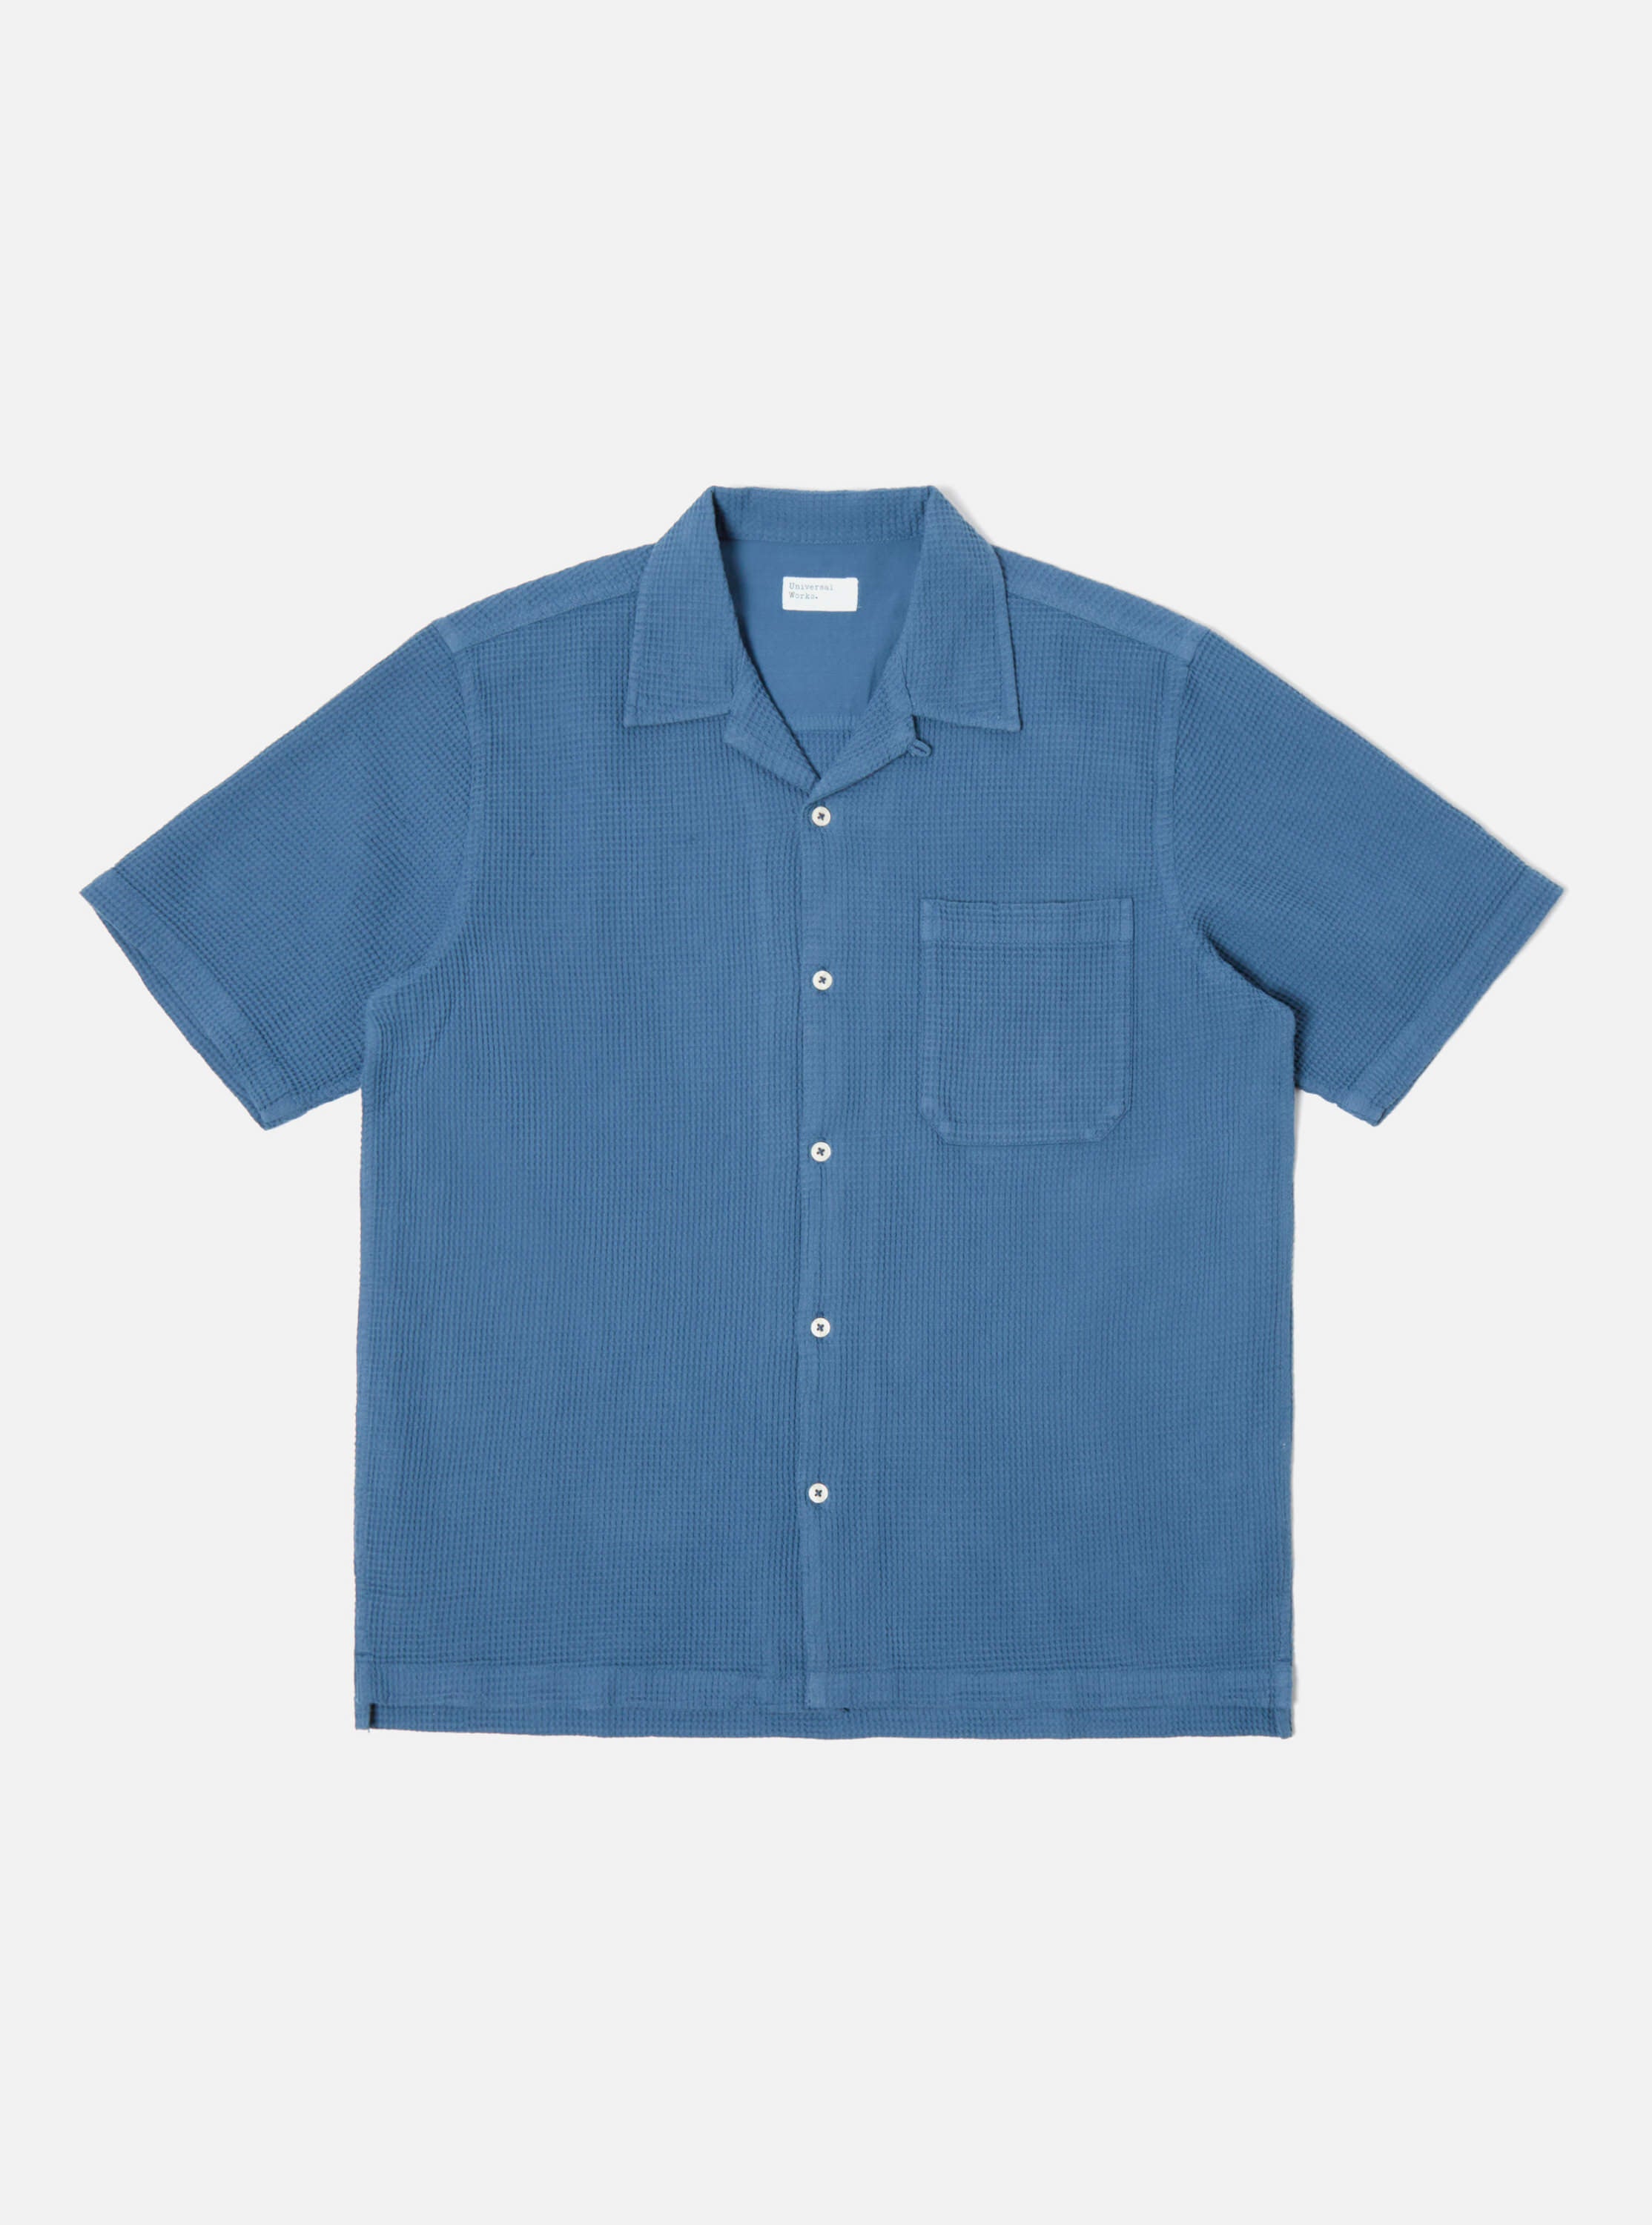 Universal Works Camp Shirt in Faded Blue Japanese Waffle